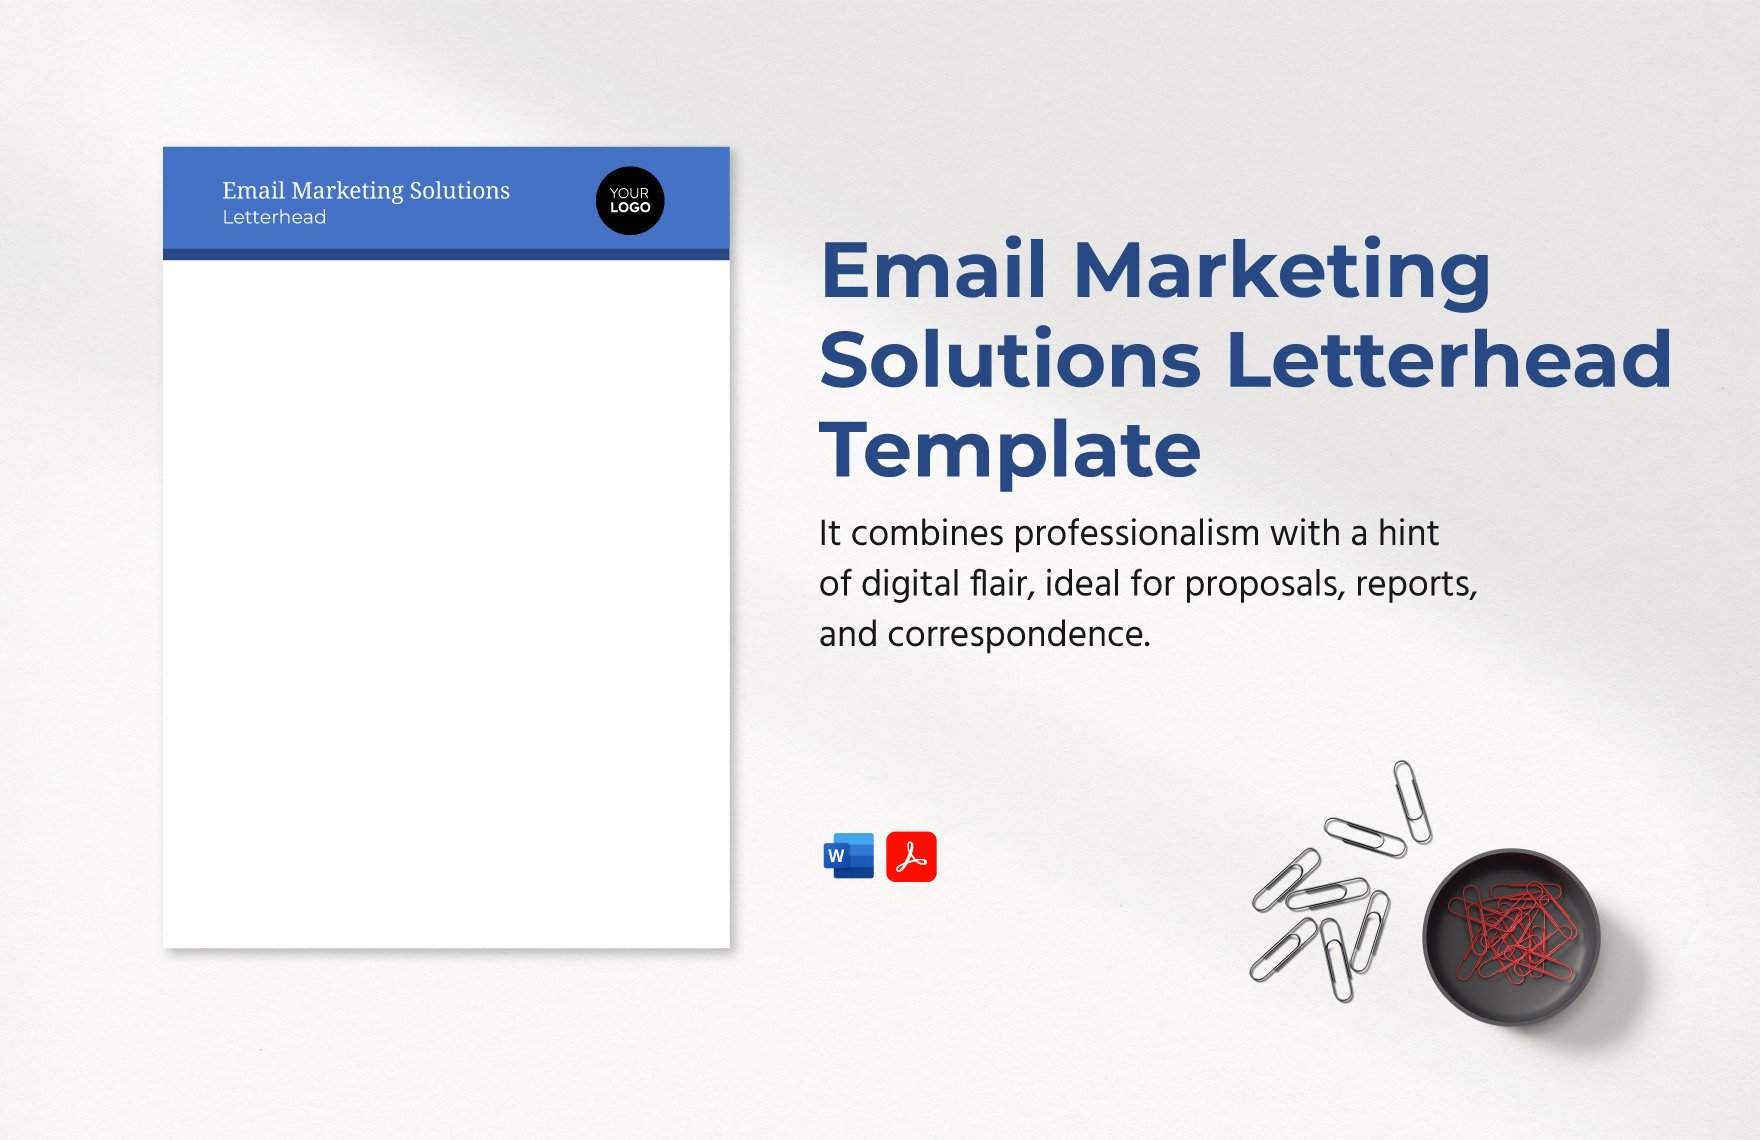 Email Marketing Solutions Letterhead Template